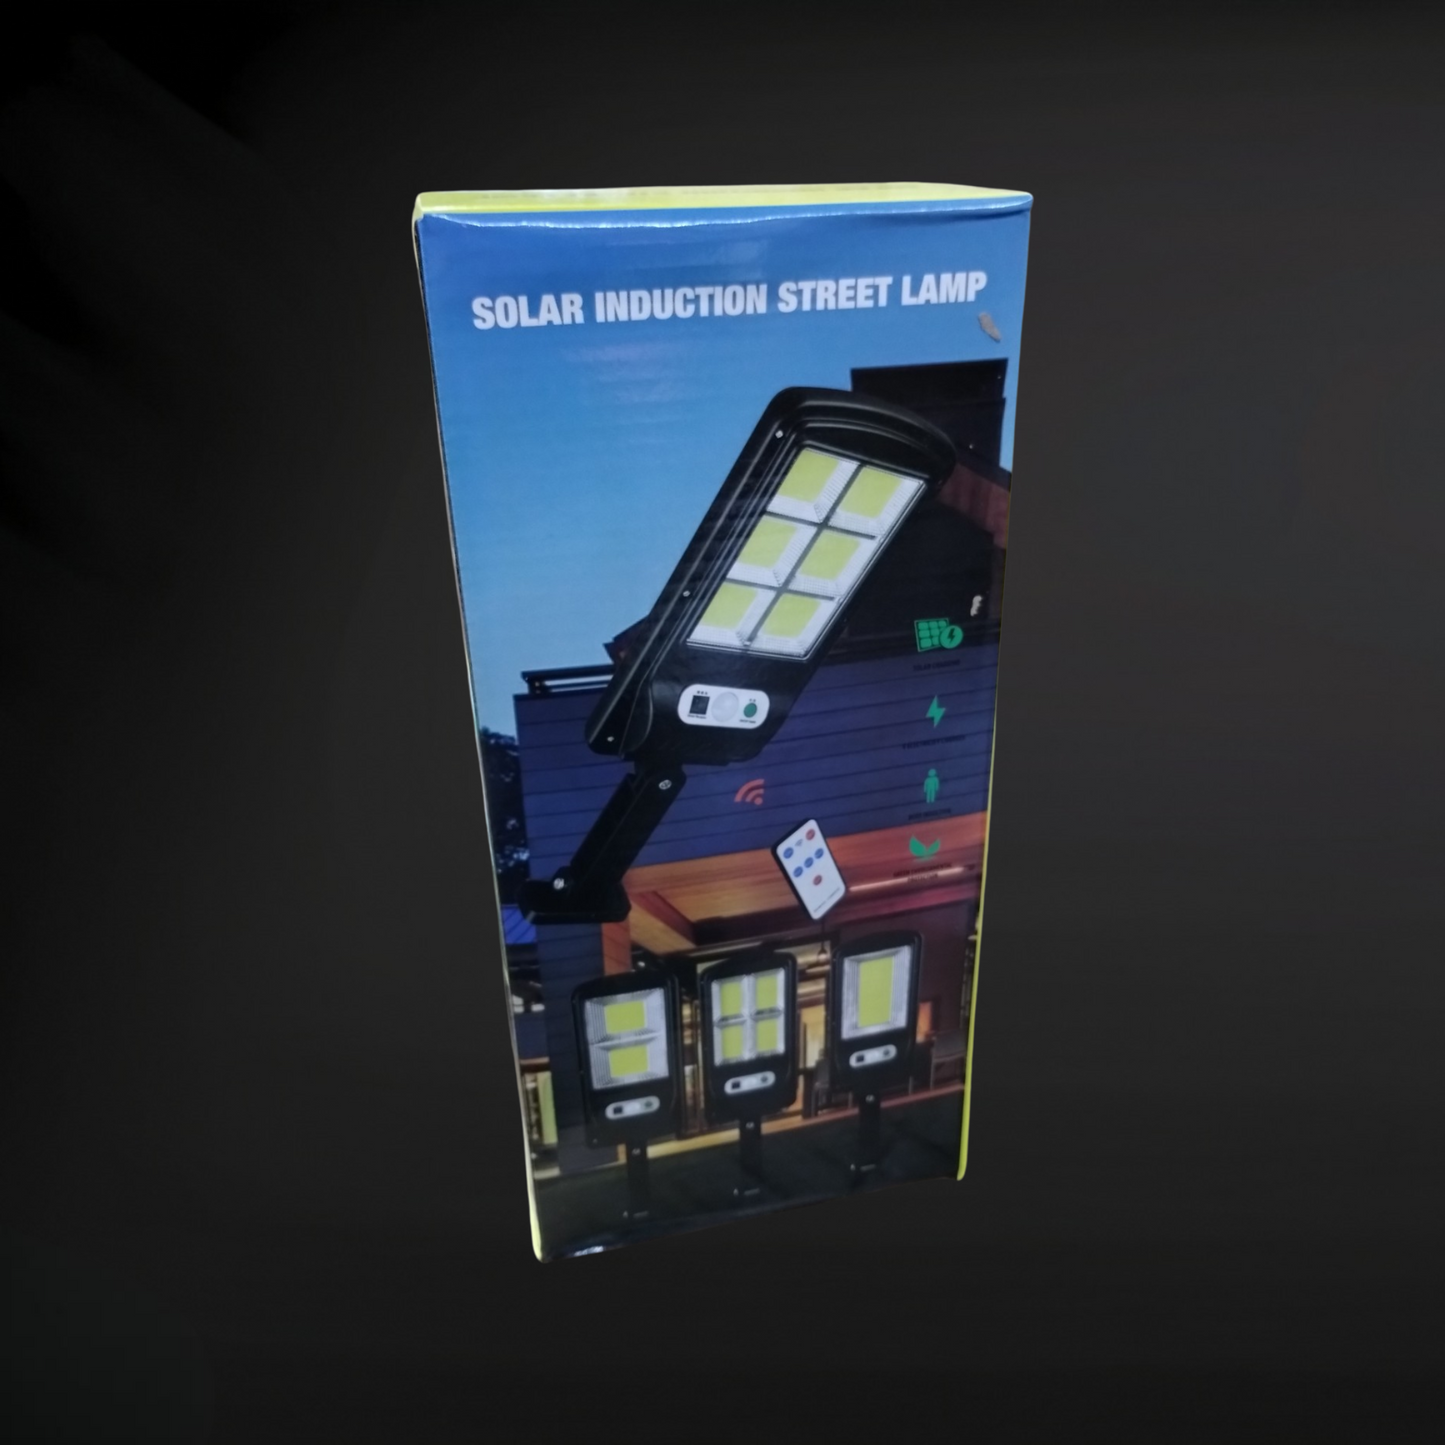 Solar-Powered LED Street Light with Motion Detector and App Control | Smart Lighting Solution